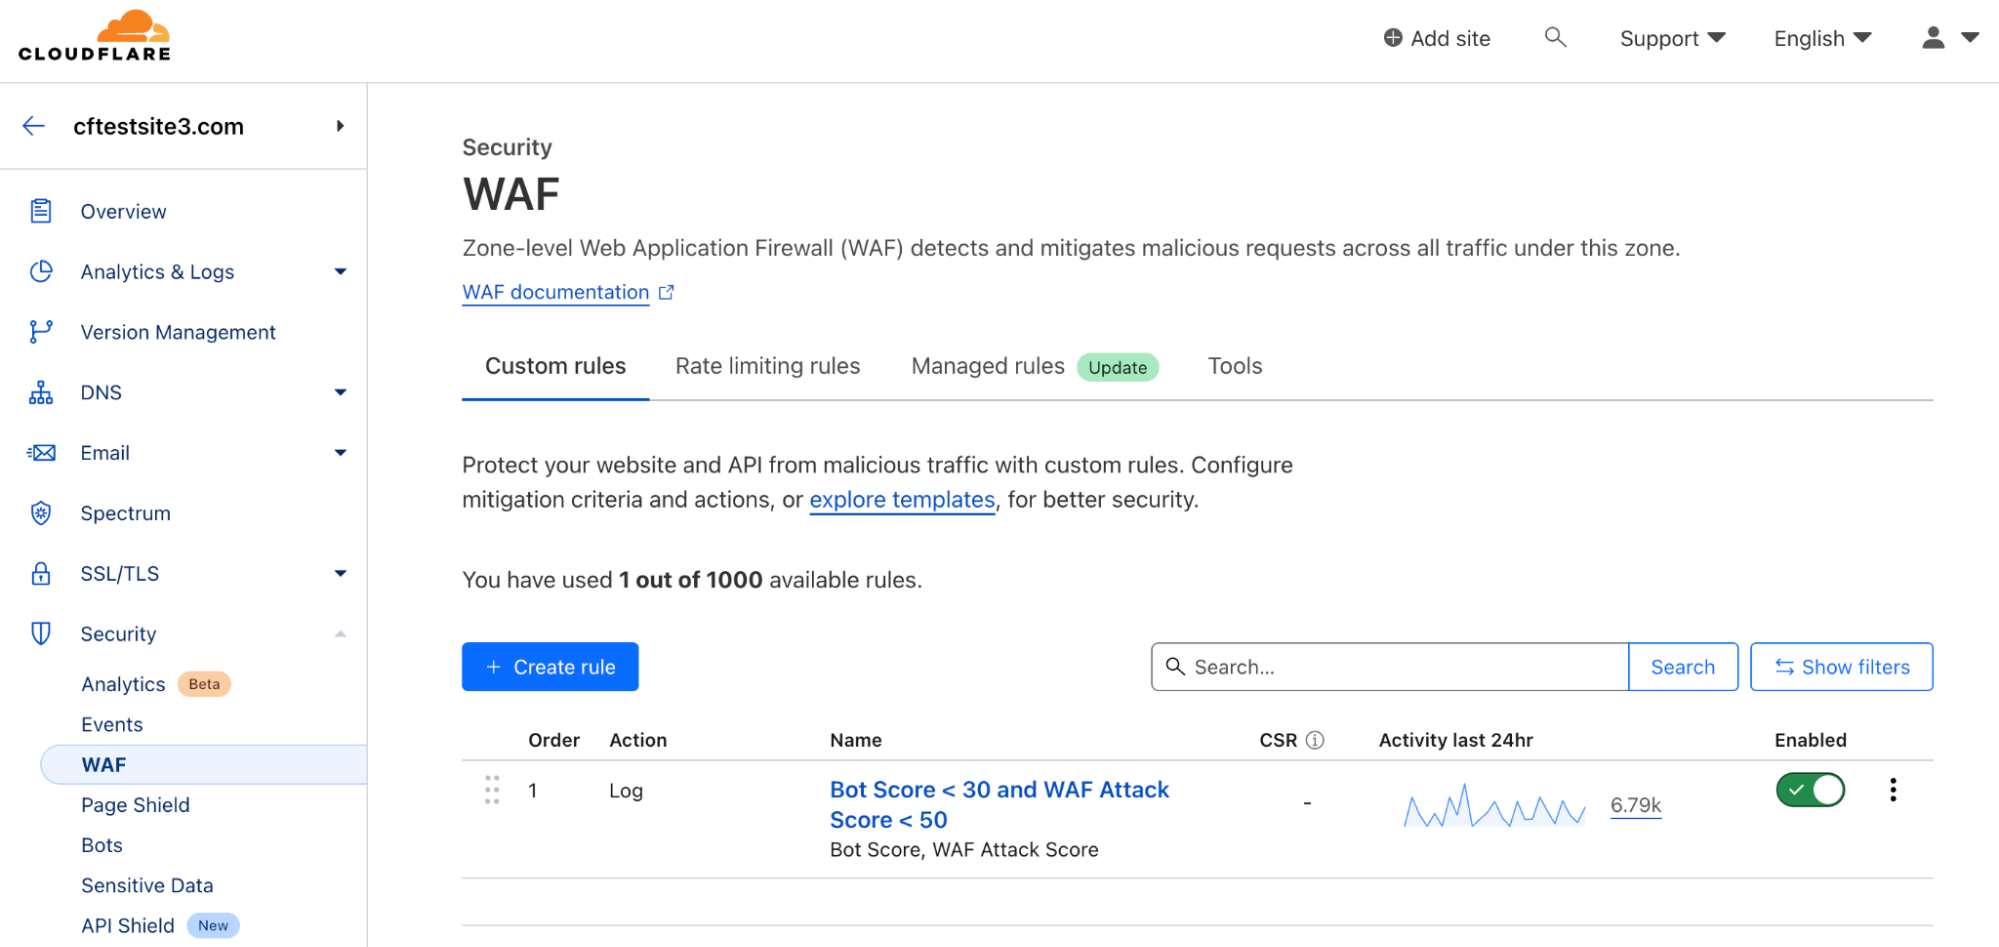 Cloudflare WAF allows for easy configuration of rules with visibility into how often the rule is hit.